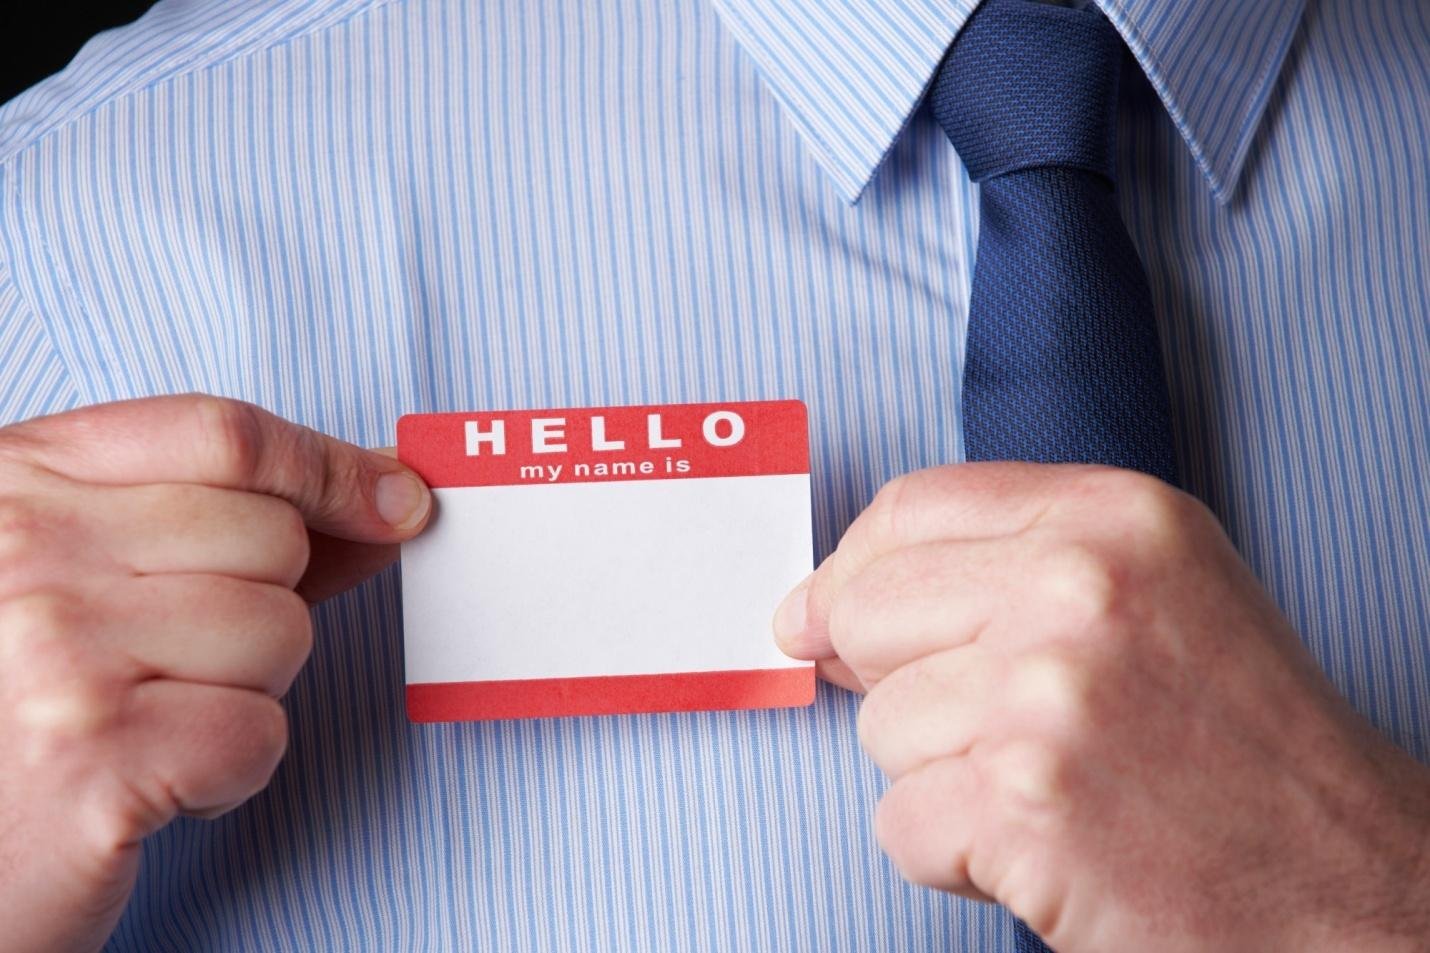 5 Reasons to Have Your Employees Wear Name Tags